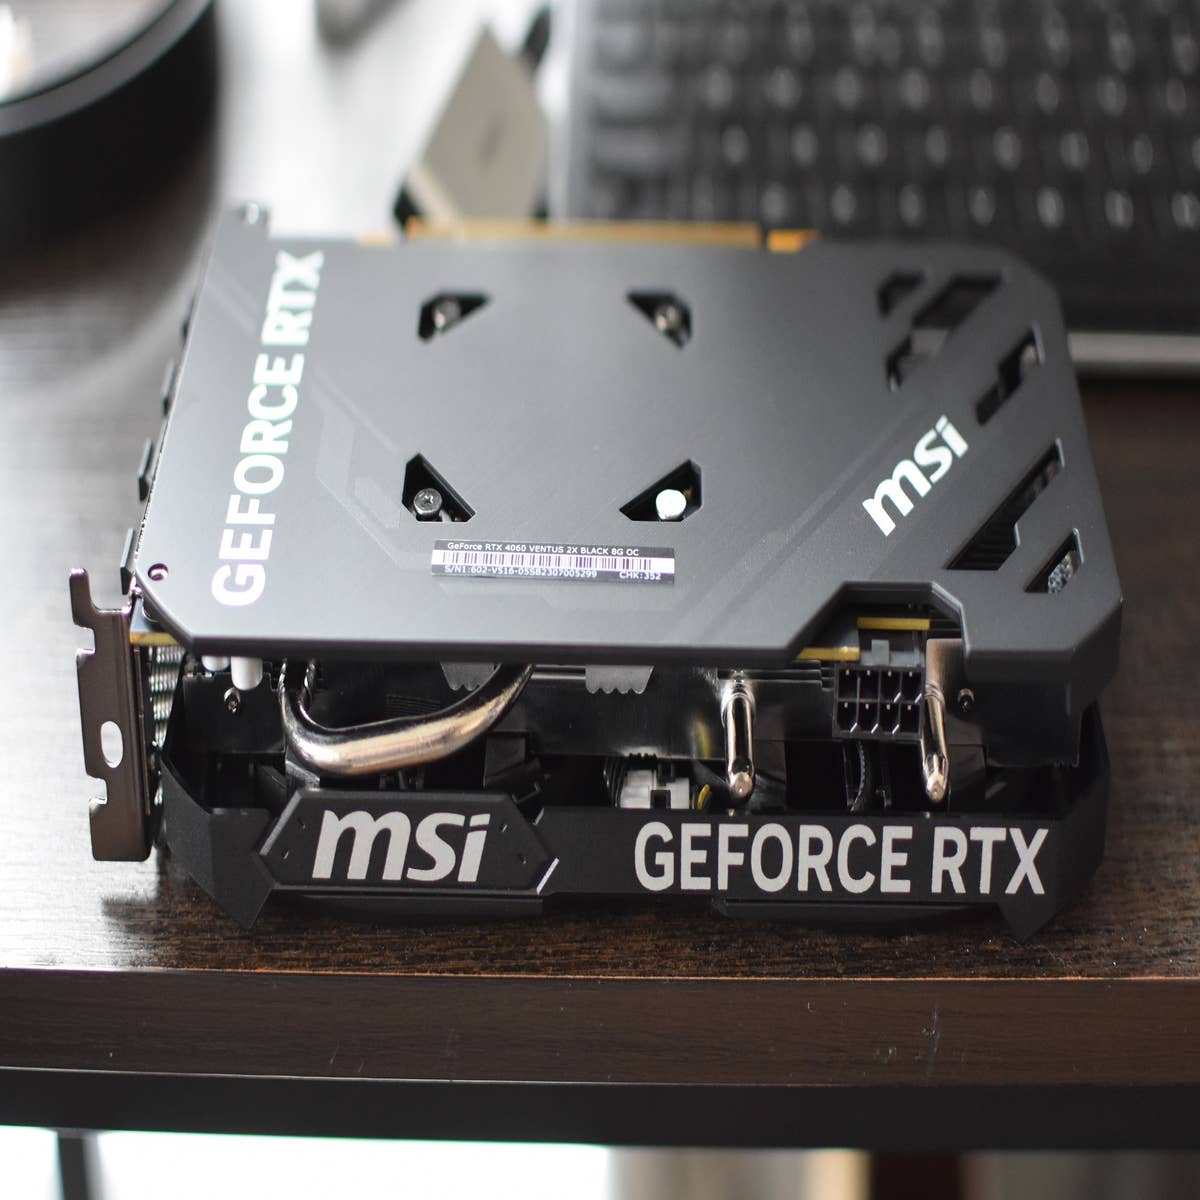 NVIDIA GeForce RTX 4060 Ti Founders Edition Review - PC Perspective